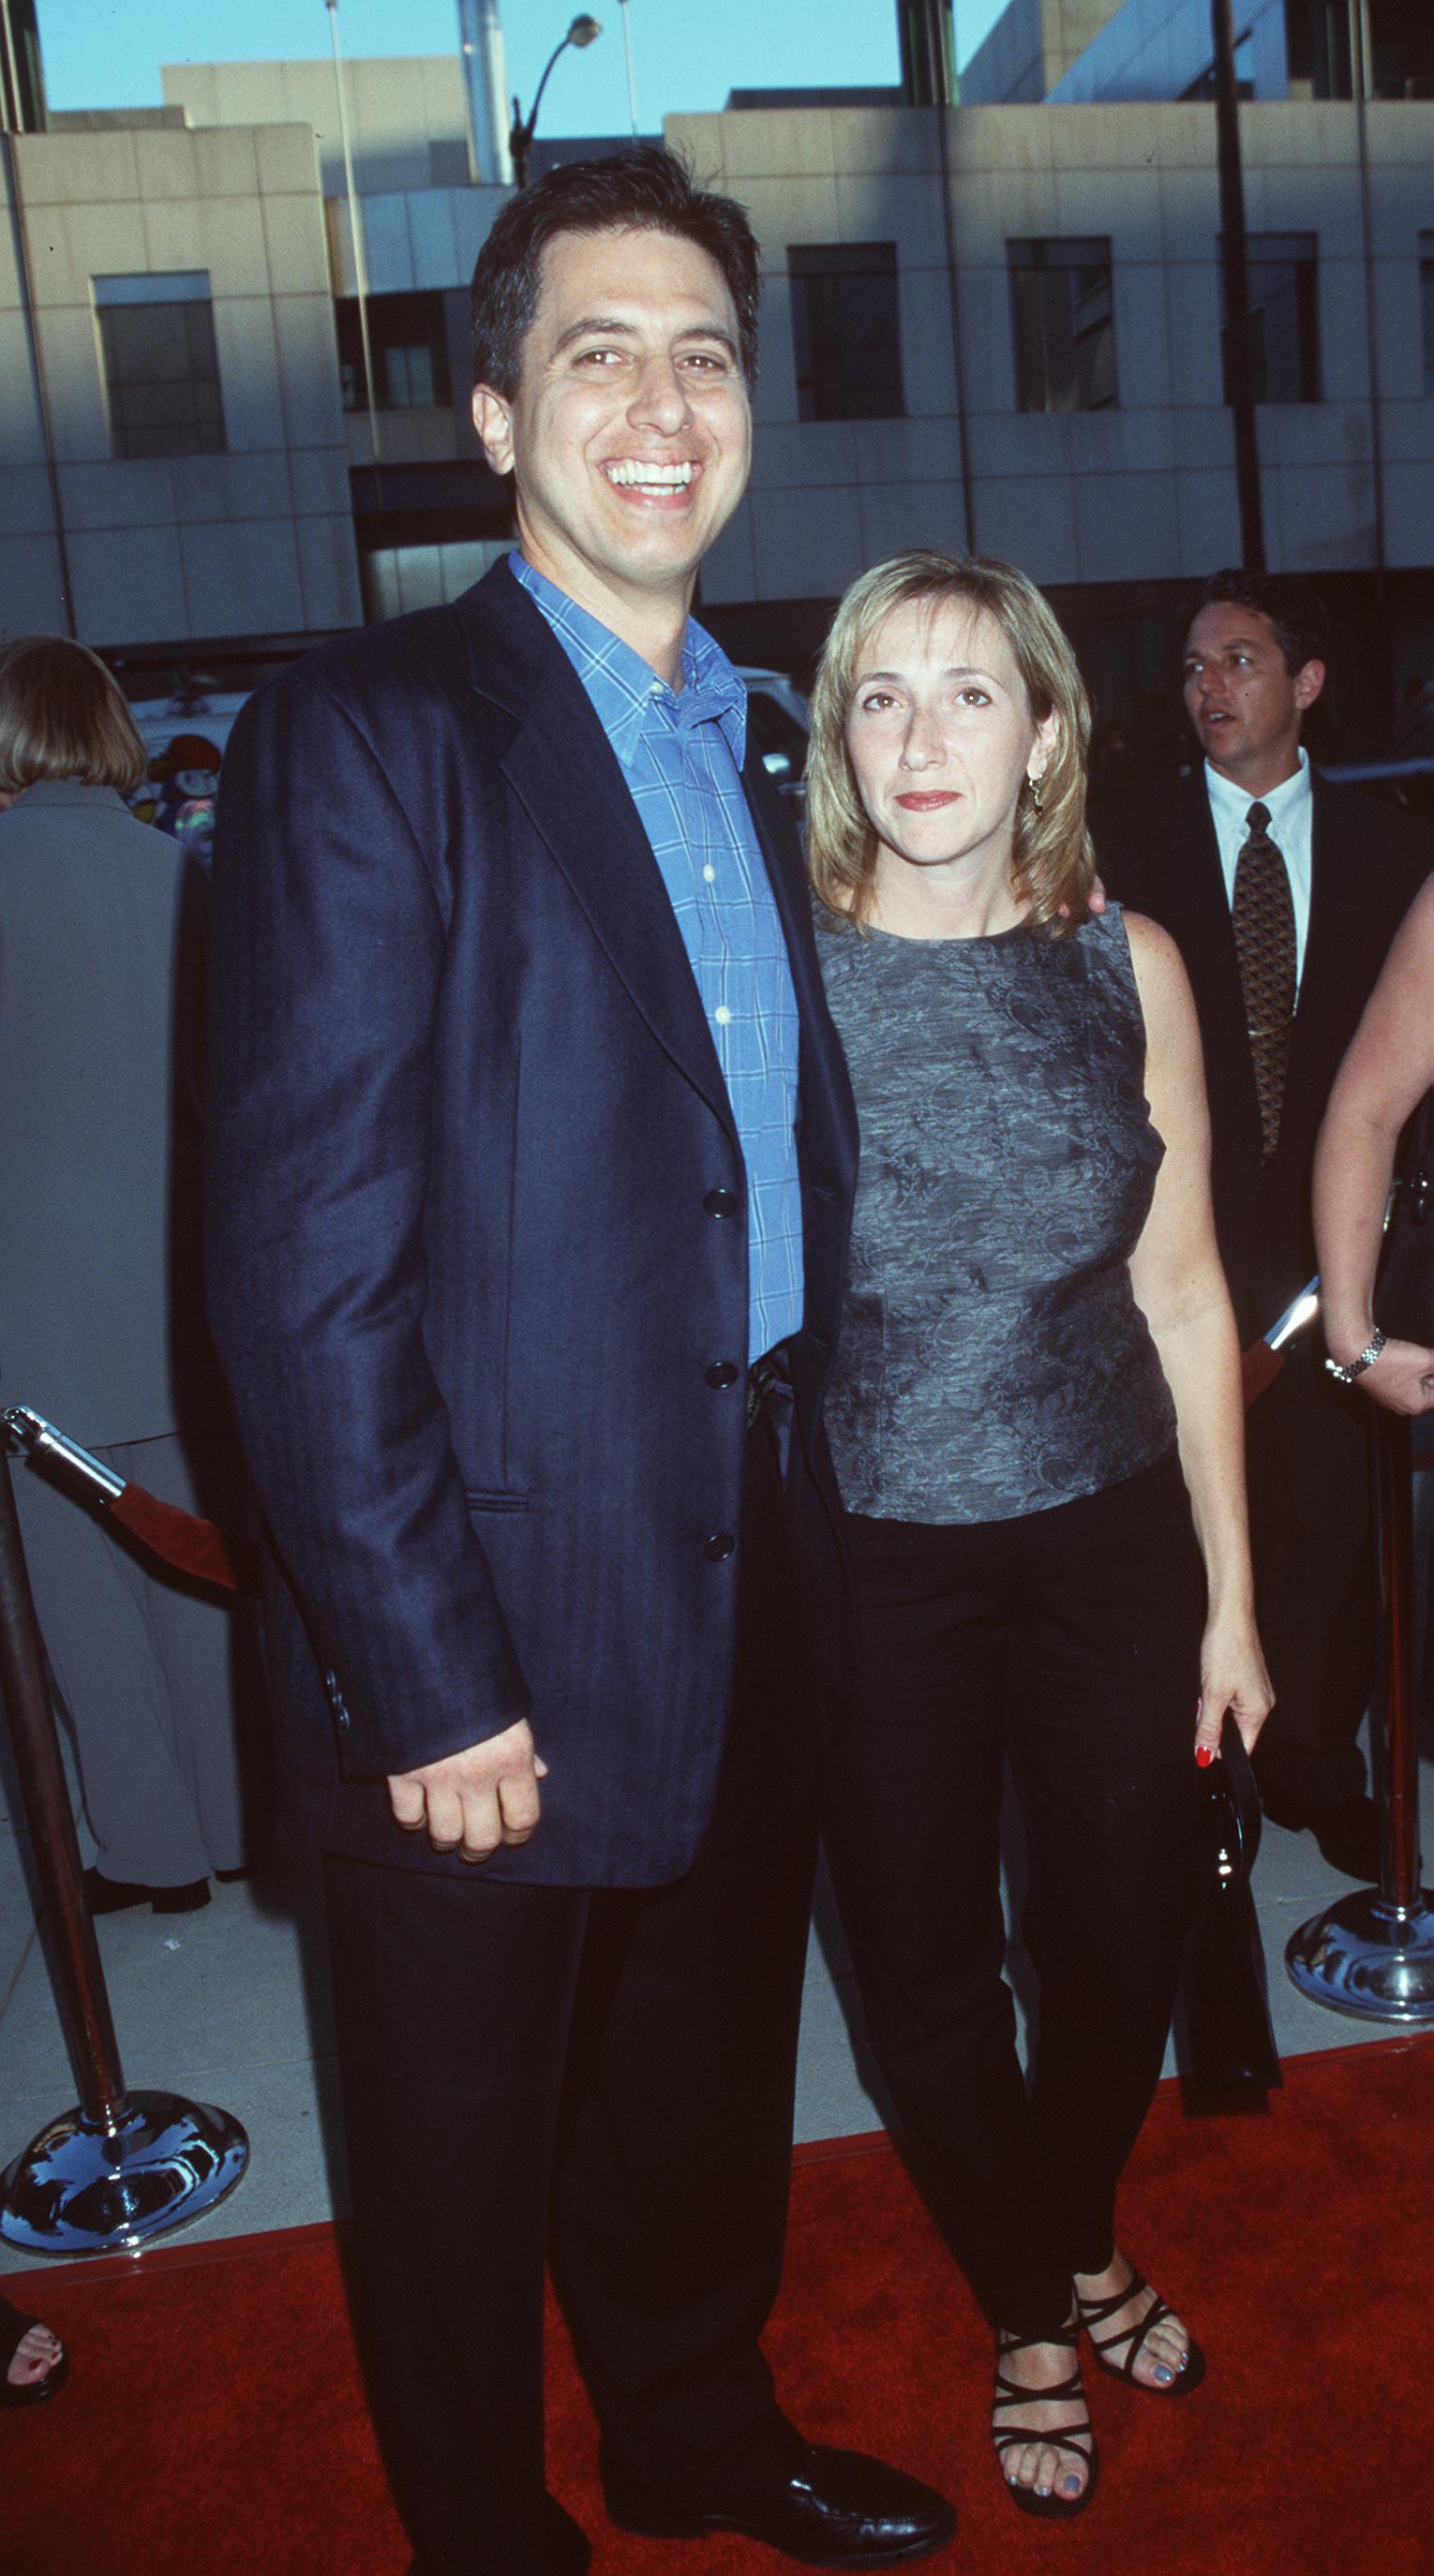 Ray Romano with his wife, Anna, at the premiere of "The Muse" on August 17, 1999, Beverly Hills, California | Source: Getty Images